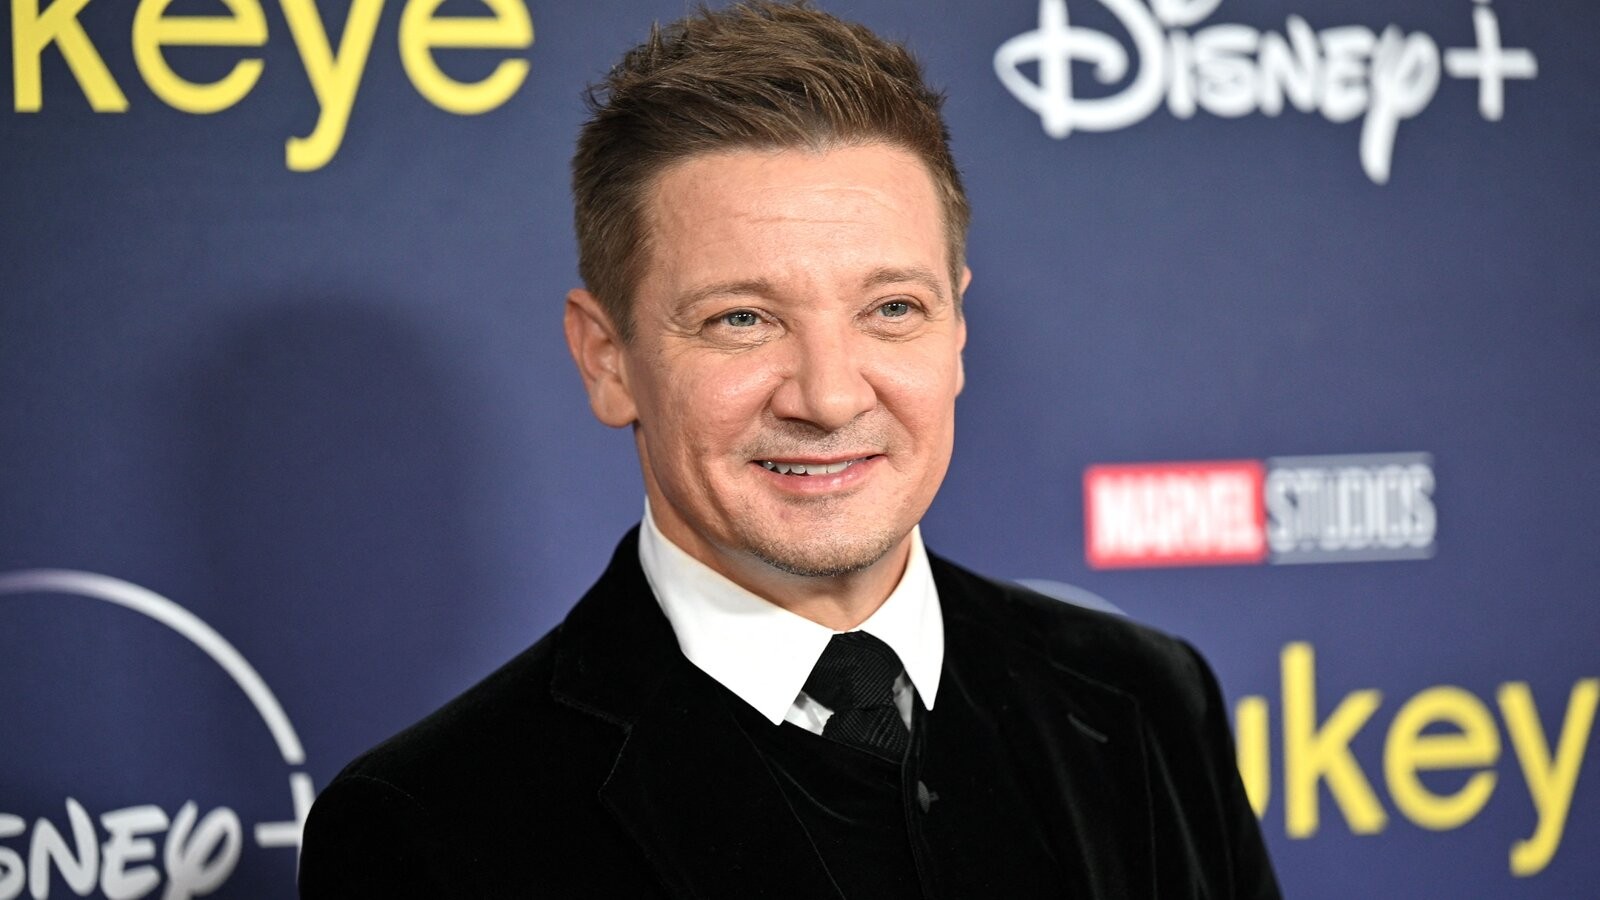 Jeremy Renner did not lose his sense of humor.